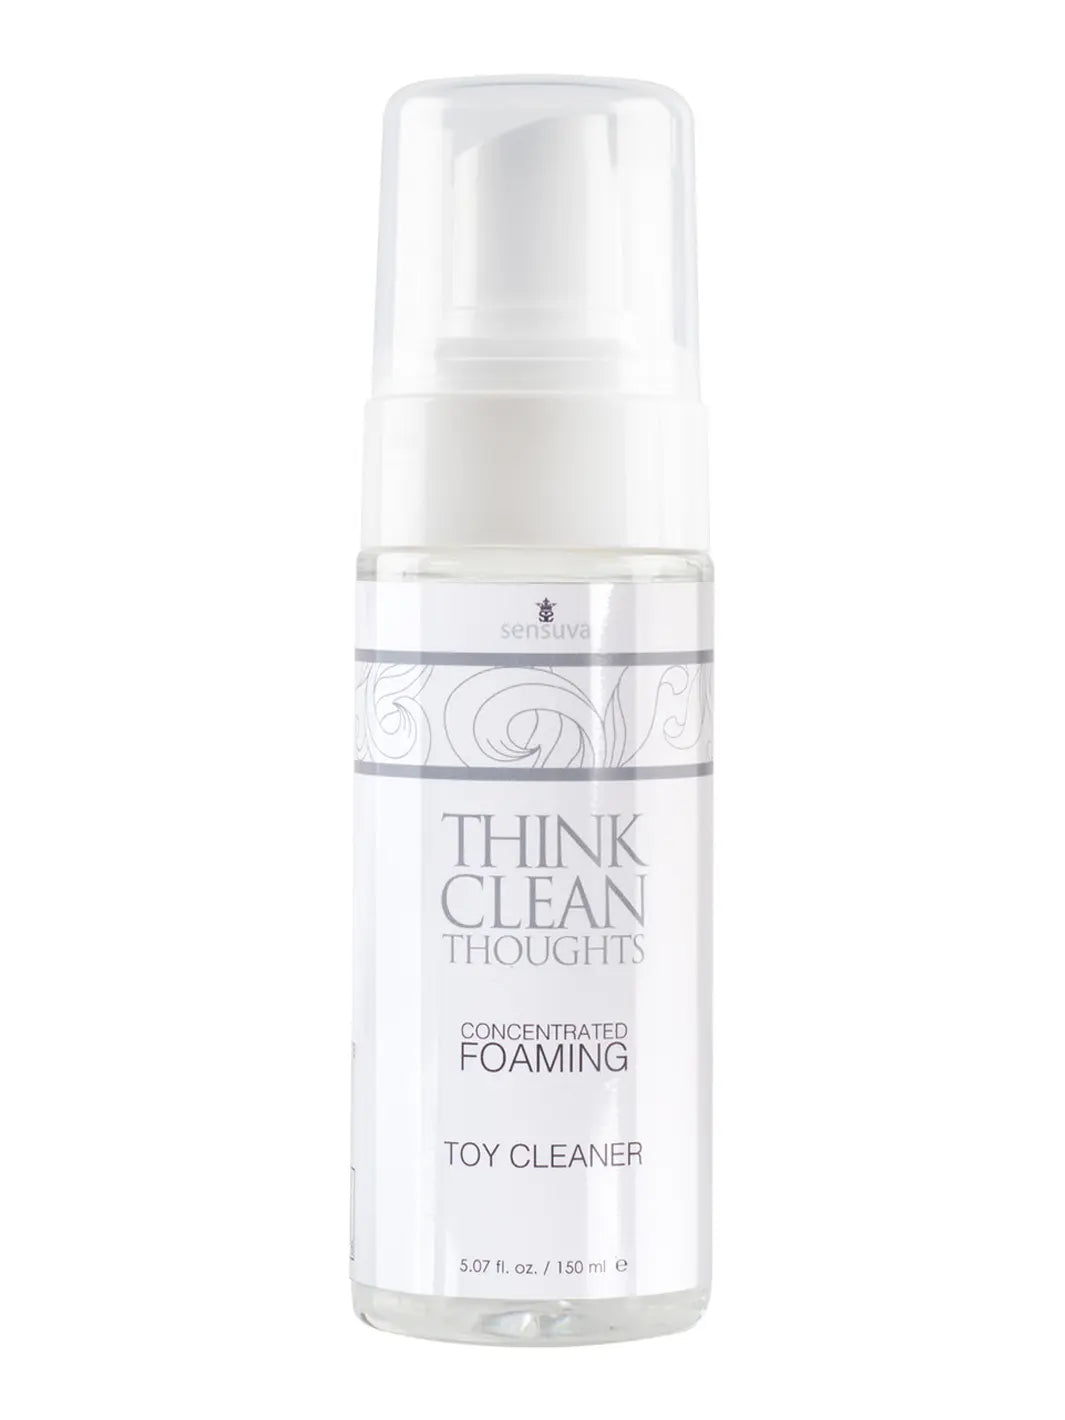 SENSUVA Think Clean Thoughts Foaming Toy Cleaner - joujou.com.au